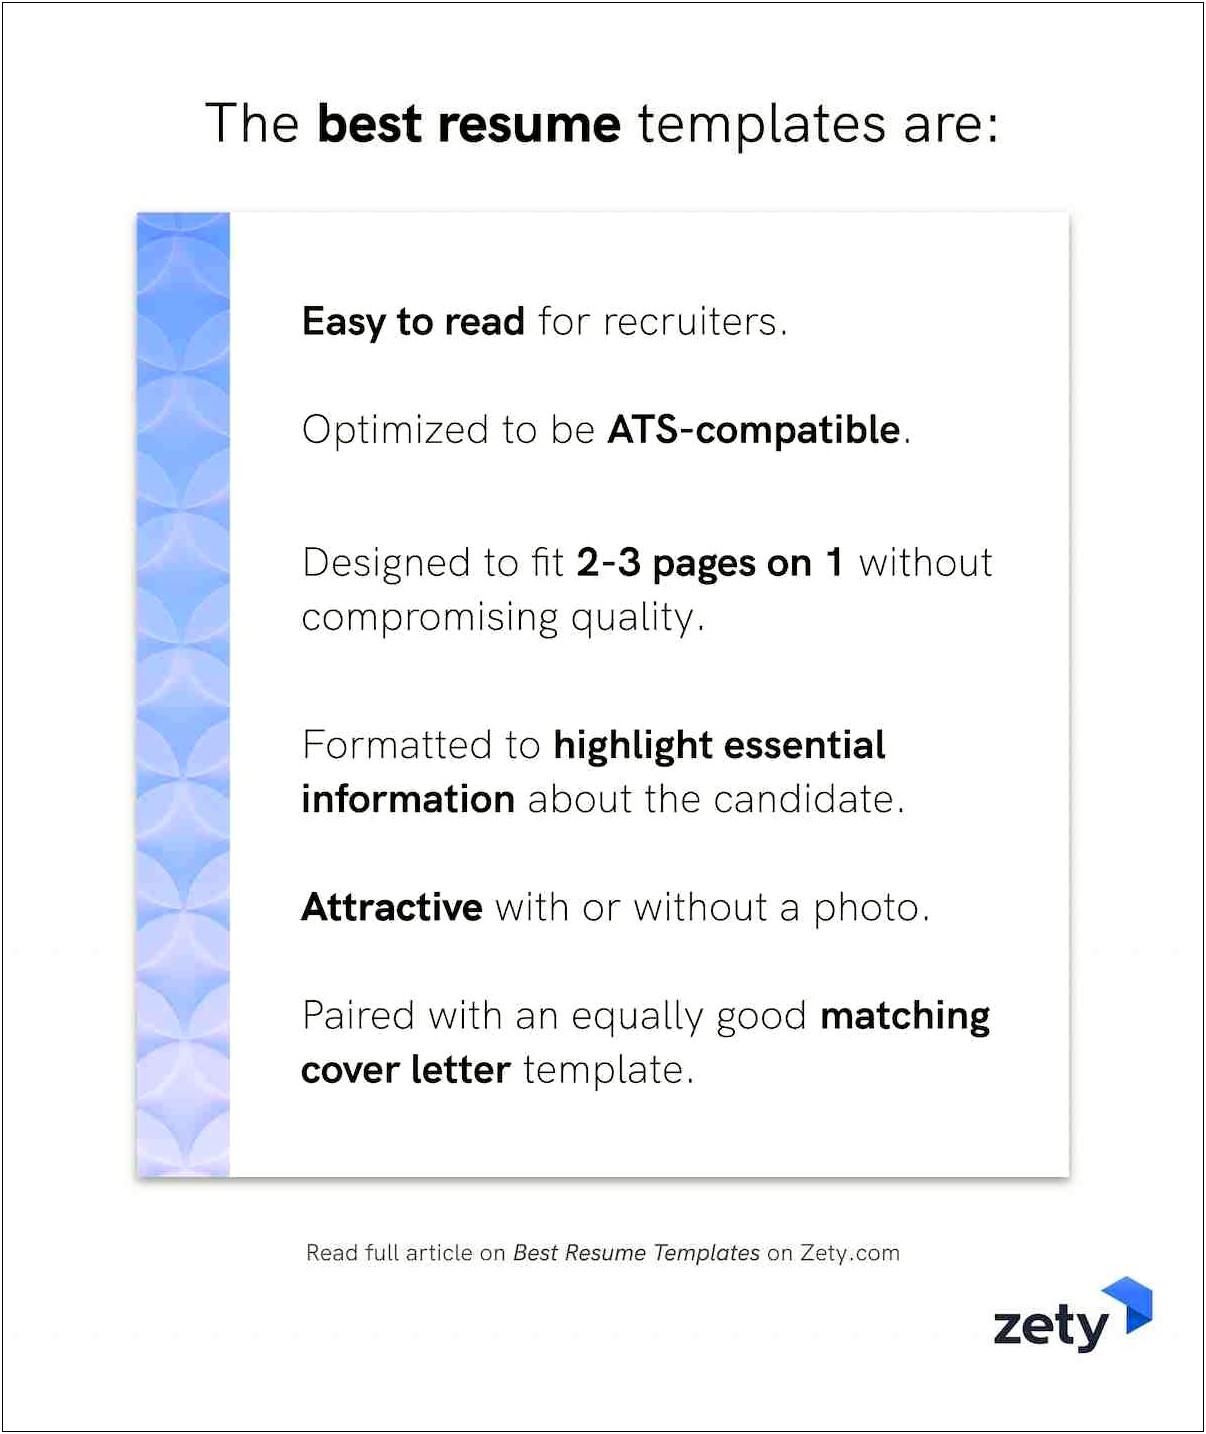 Simple Resume Templates That Are Easily Machine Read